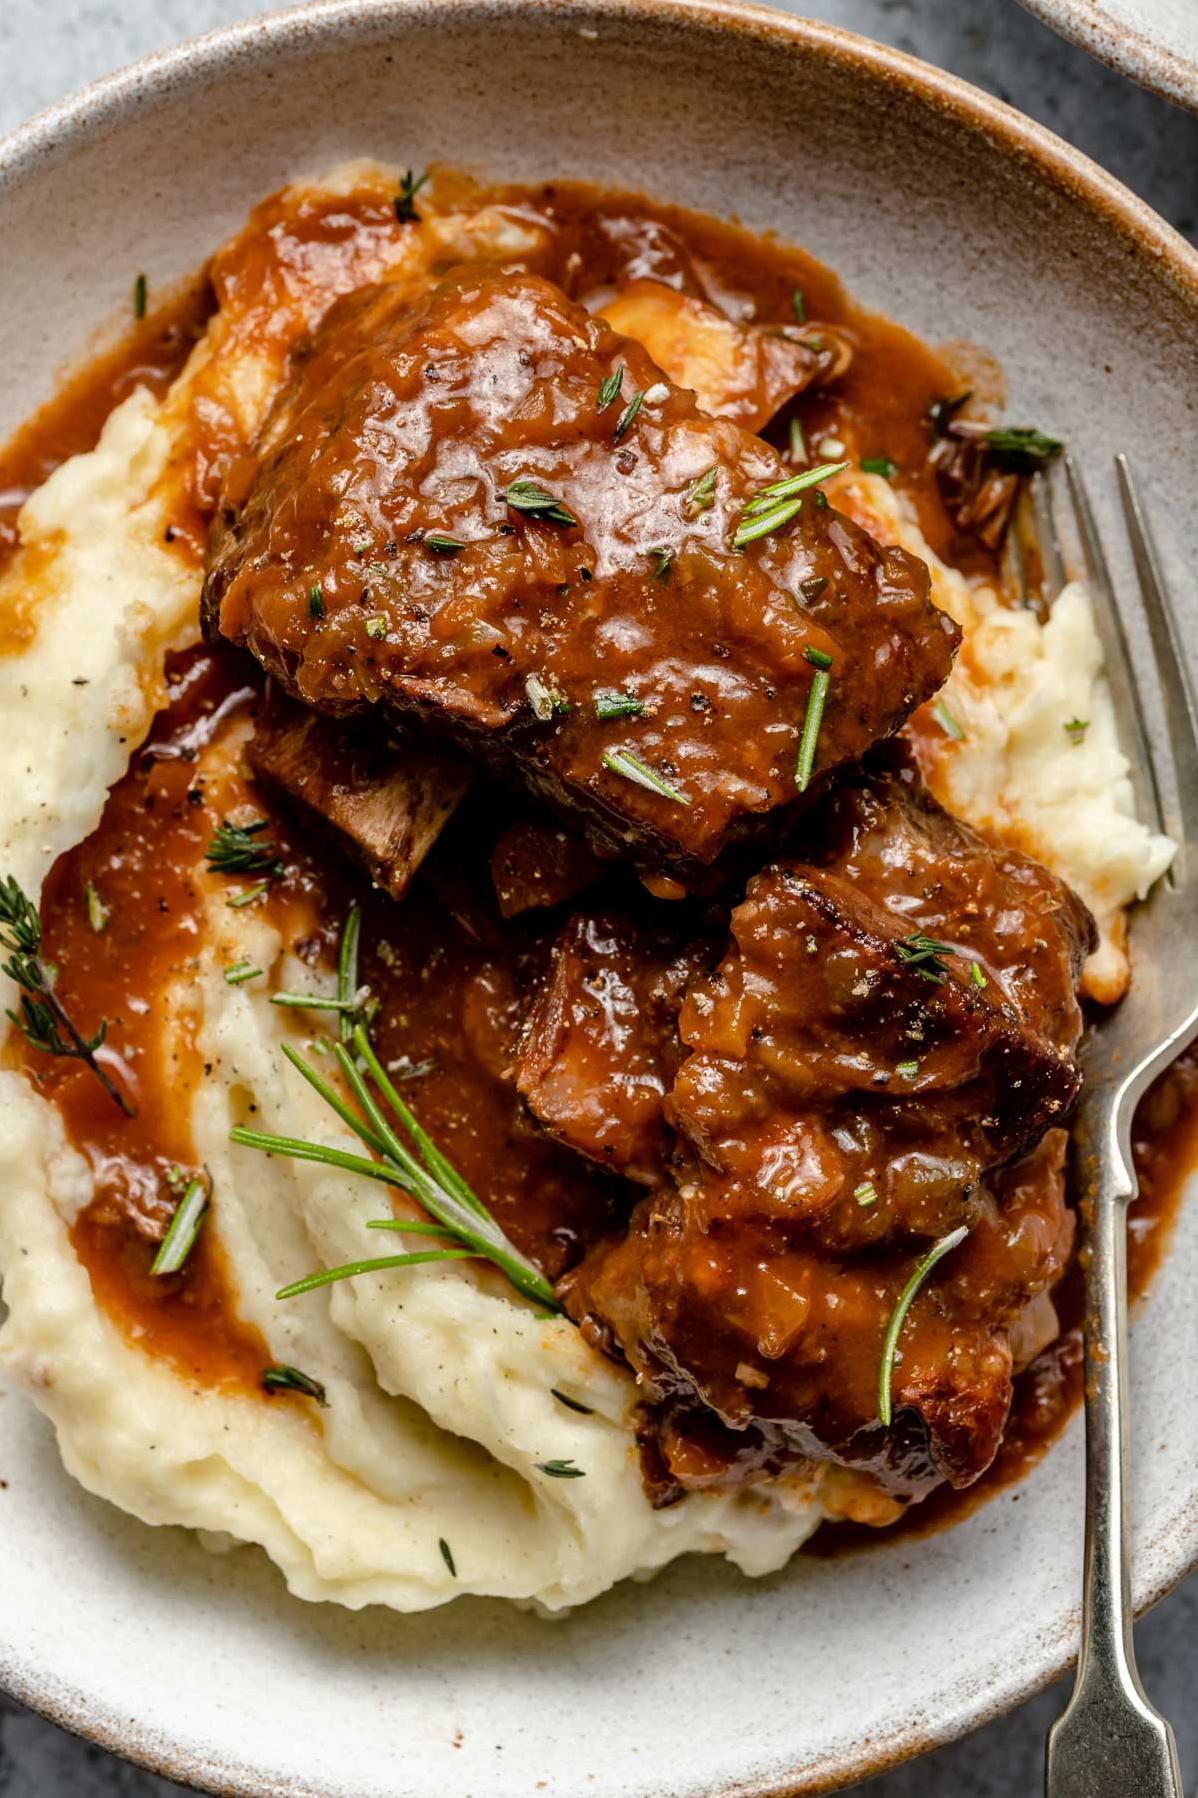  Marinated in delicious red wine, these short ribs bring a new level of flavor to the table.